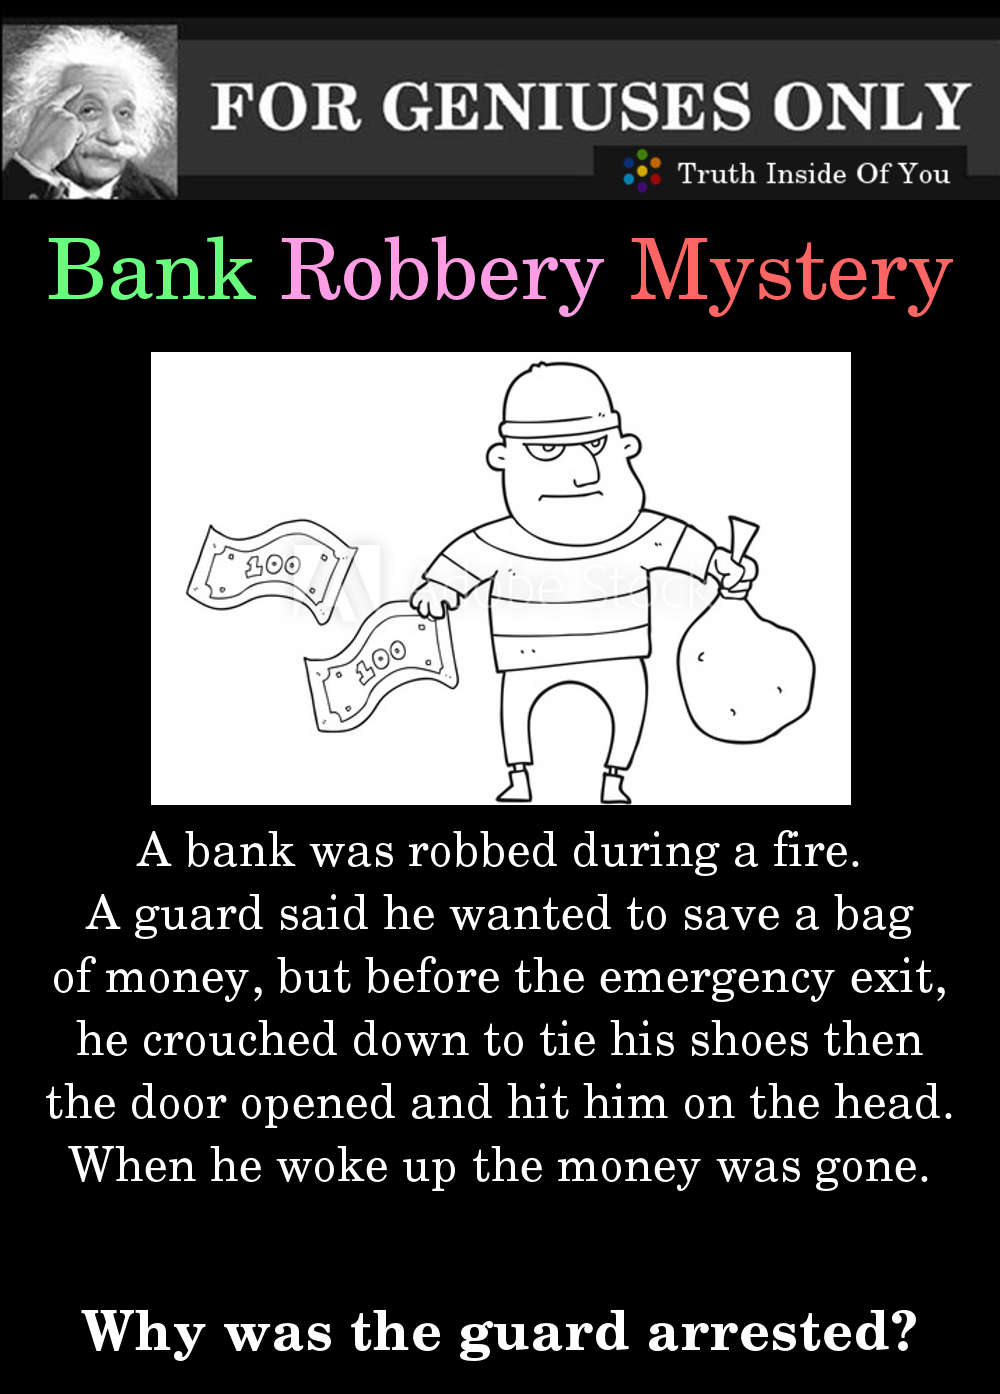 A bank was robbed during a fire